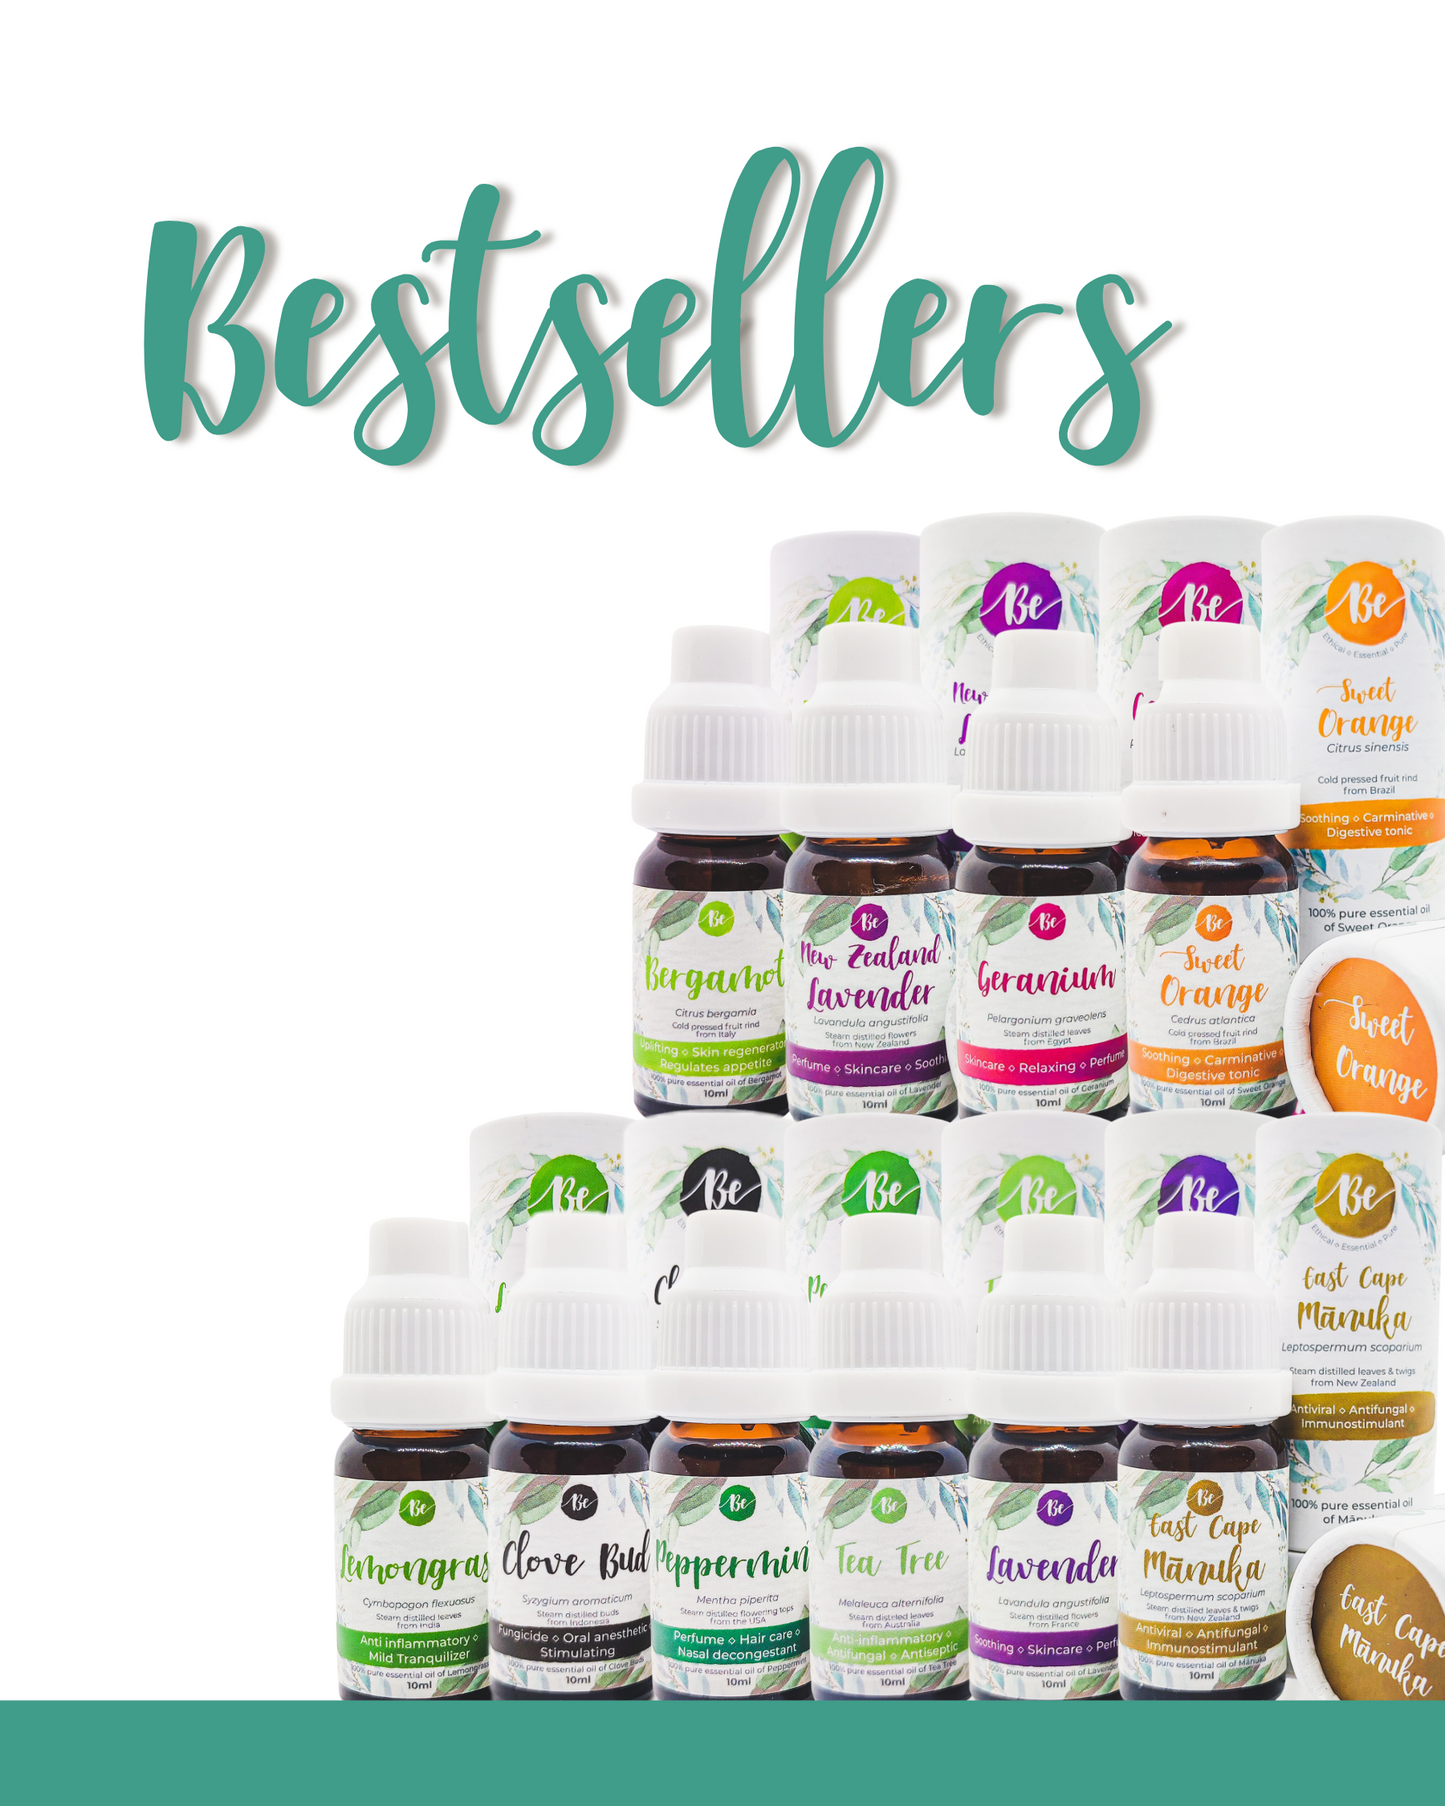 Bestsellers Collection